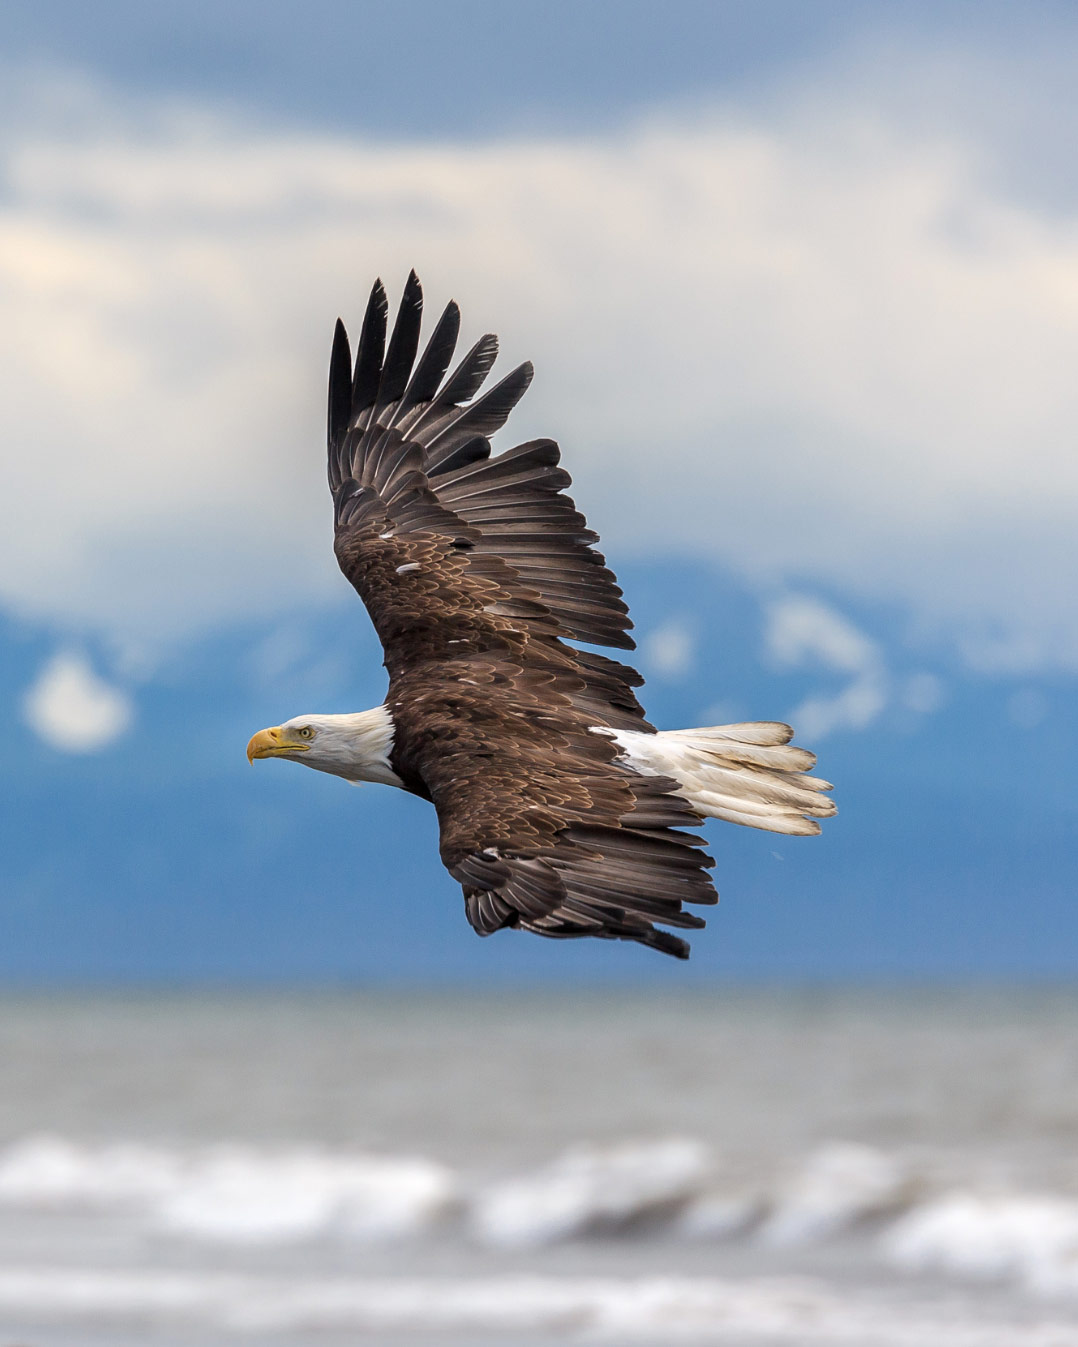 An eagle flies over a beach with rocky mountains in the background